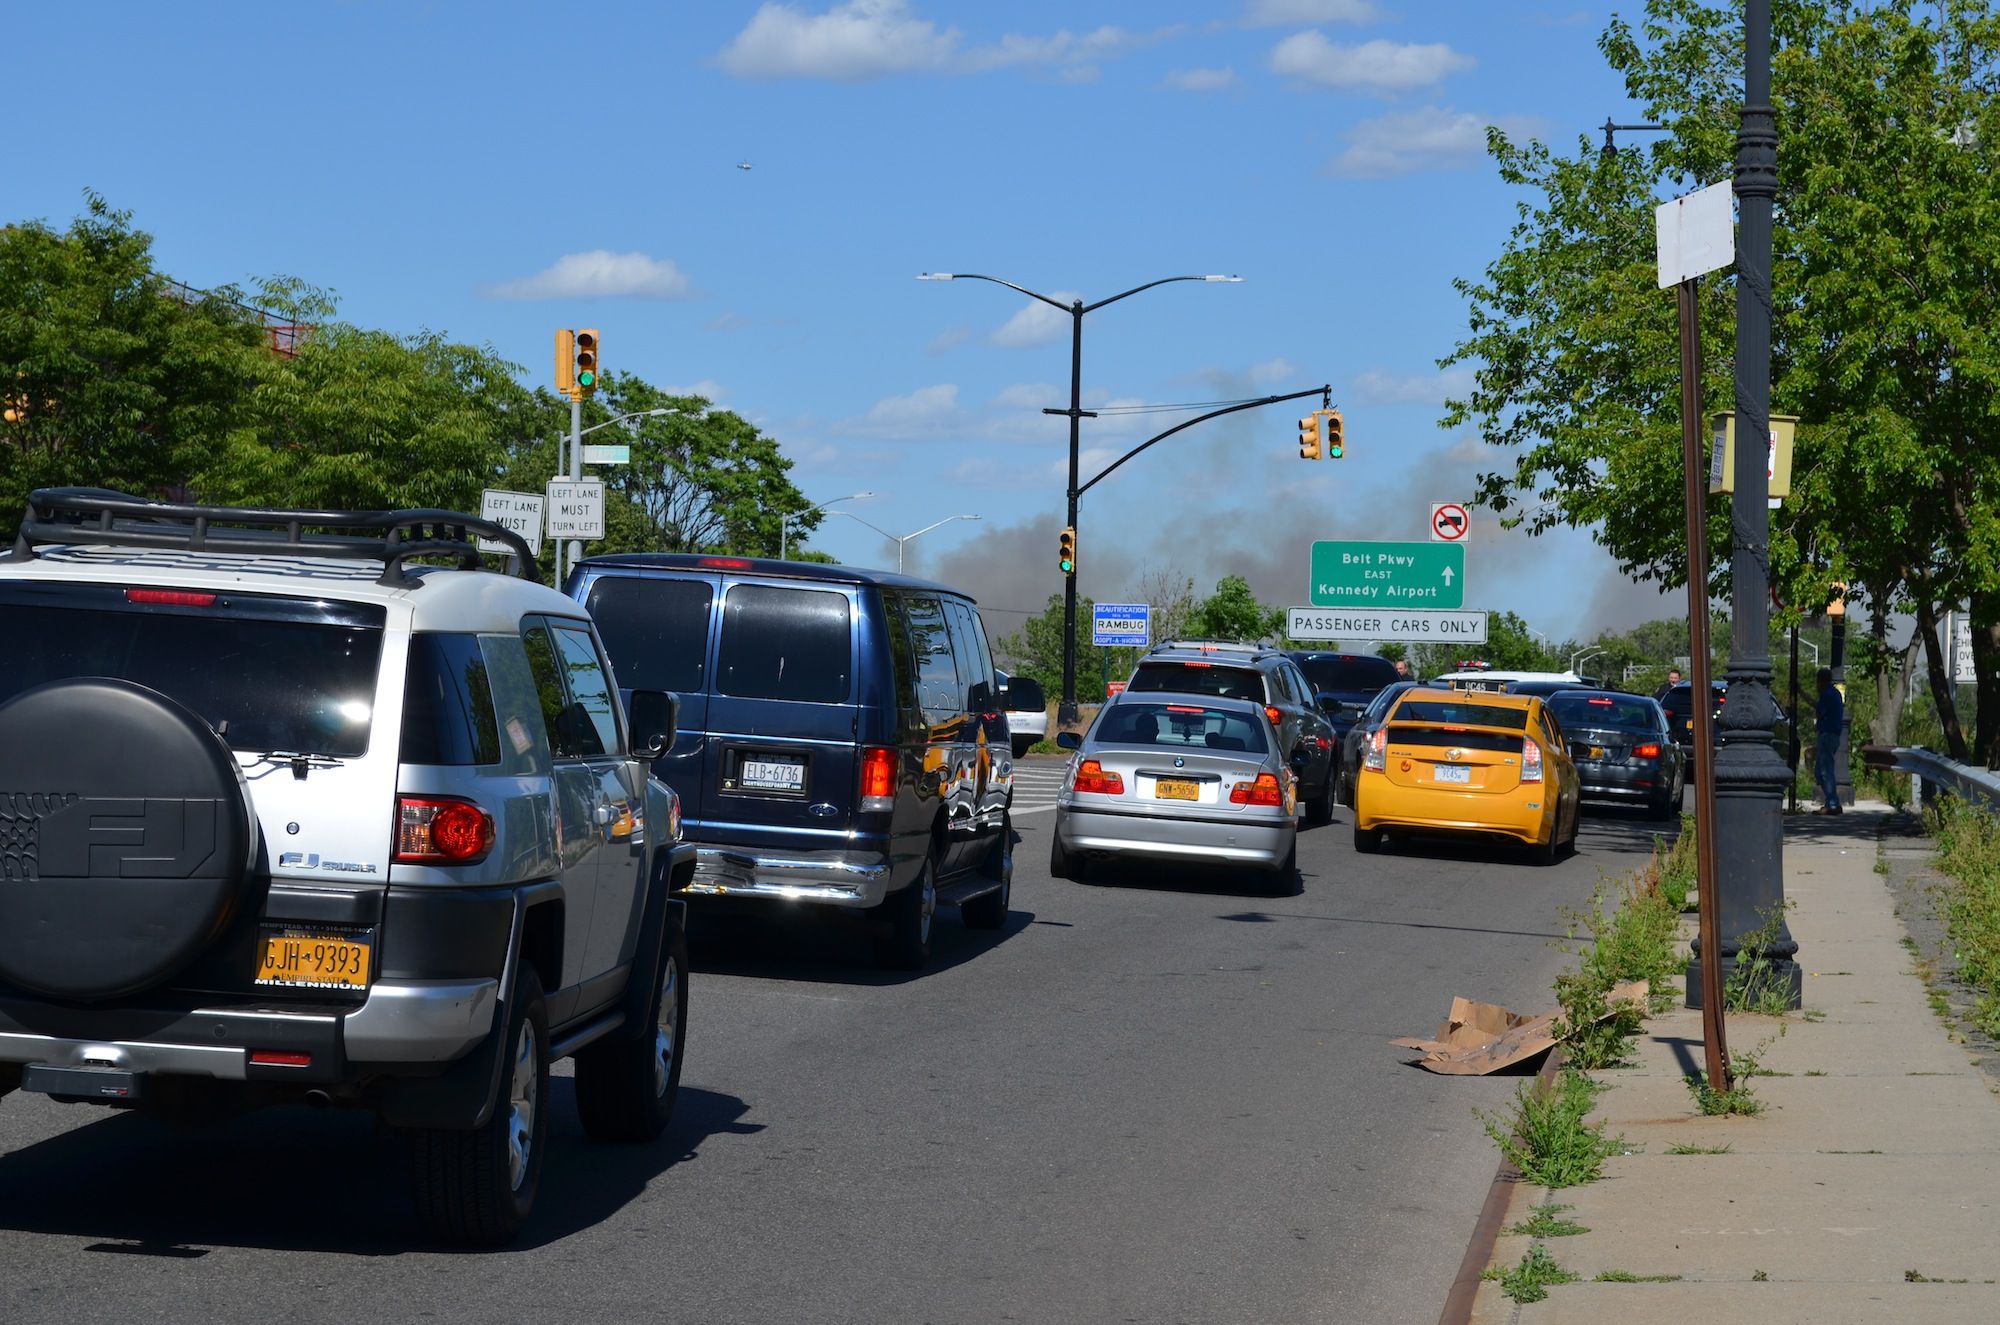 Firefighters being turned away from the Belt Parkway at Knapp Street. (Photo: Alex Ellefson / Sheepshead Bites)